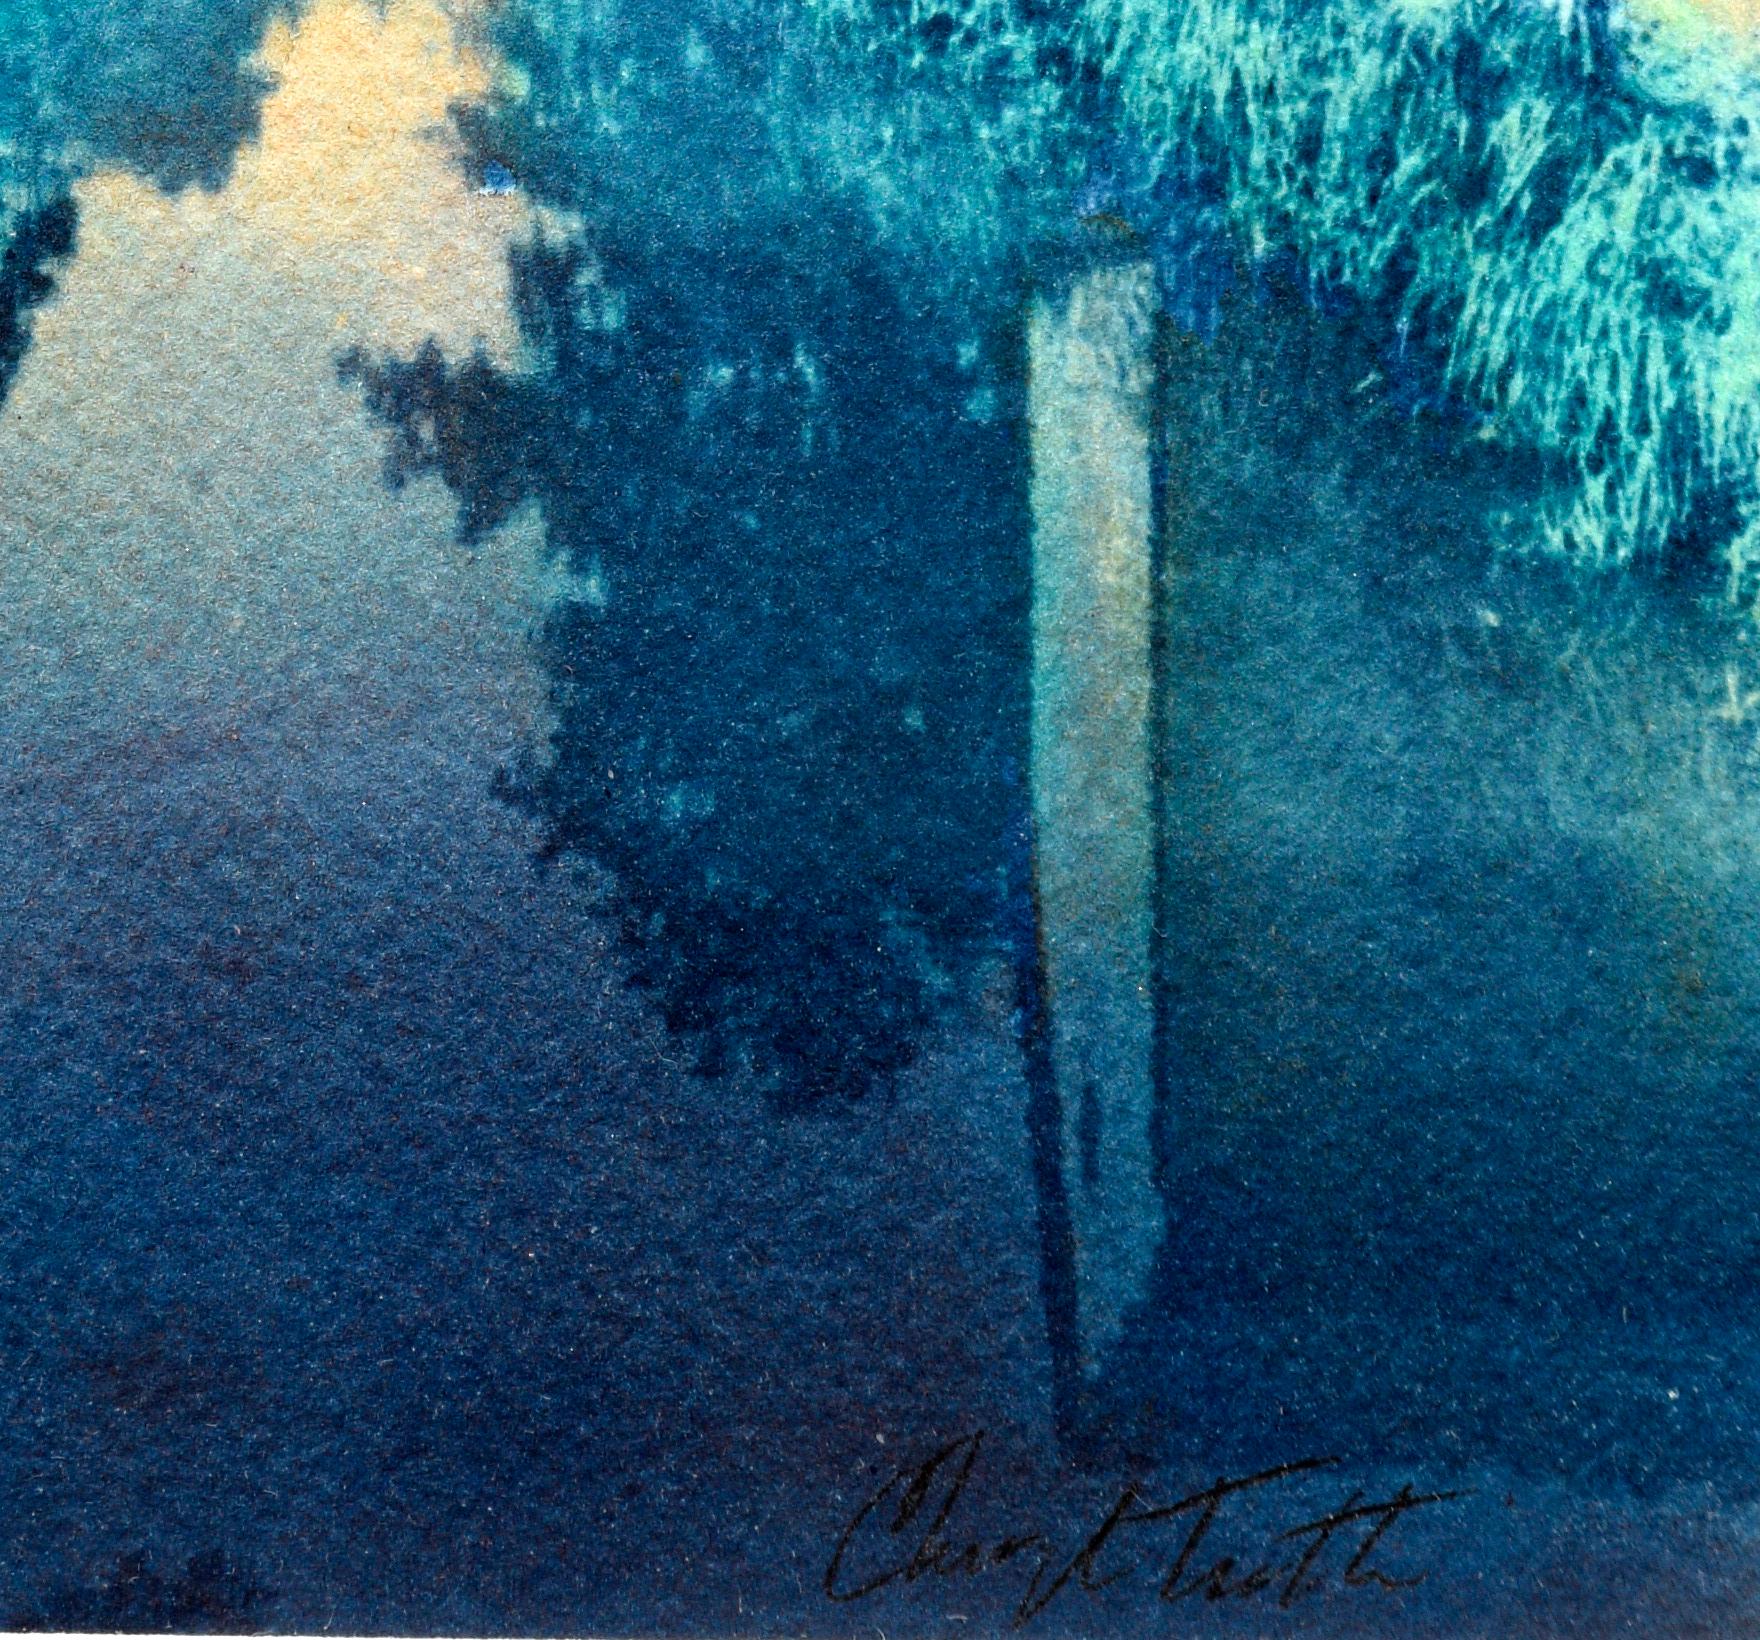 Italian Countryside Landscape Cyanotype / Watercolor - Expressionist Mixed Media Art by Cheryl Trotter